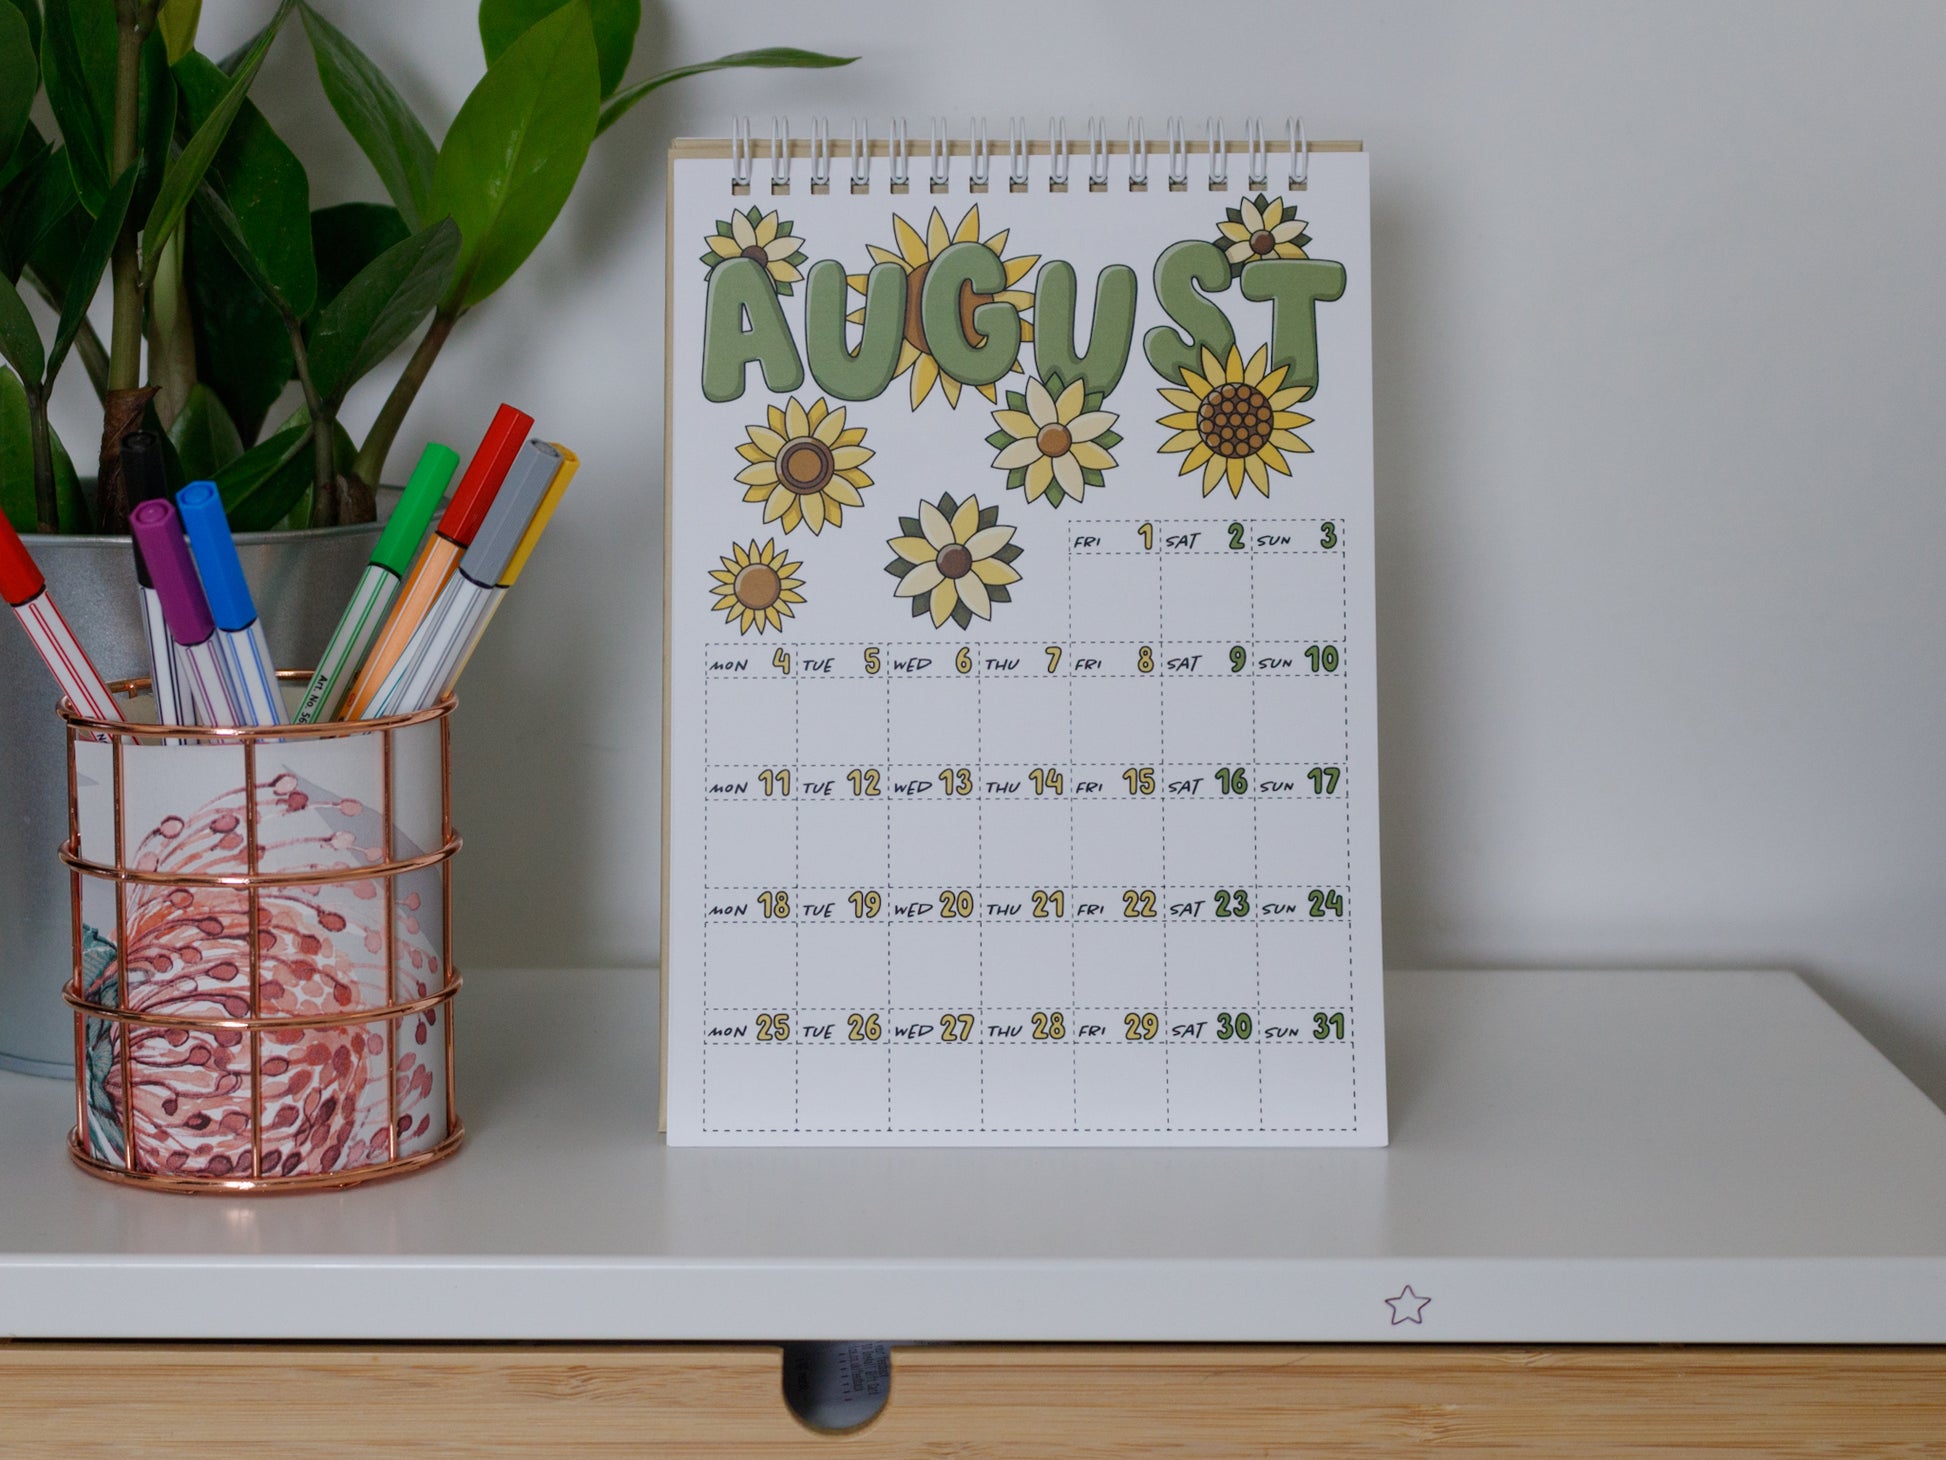 2025 Colourful Desk Calendars - August with Sunflower Design